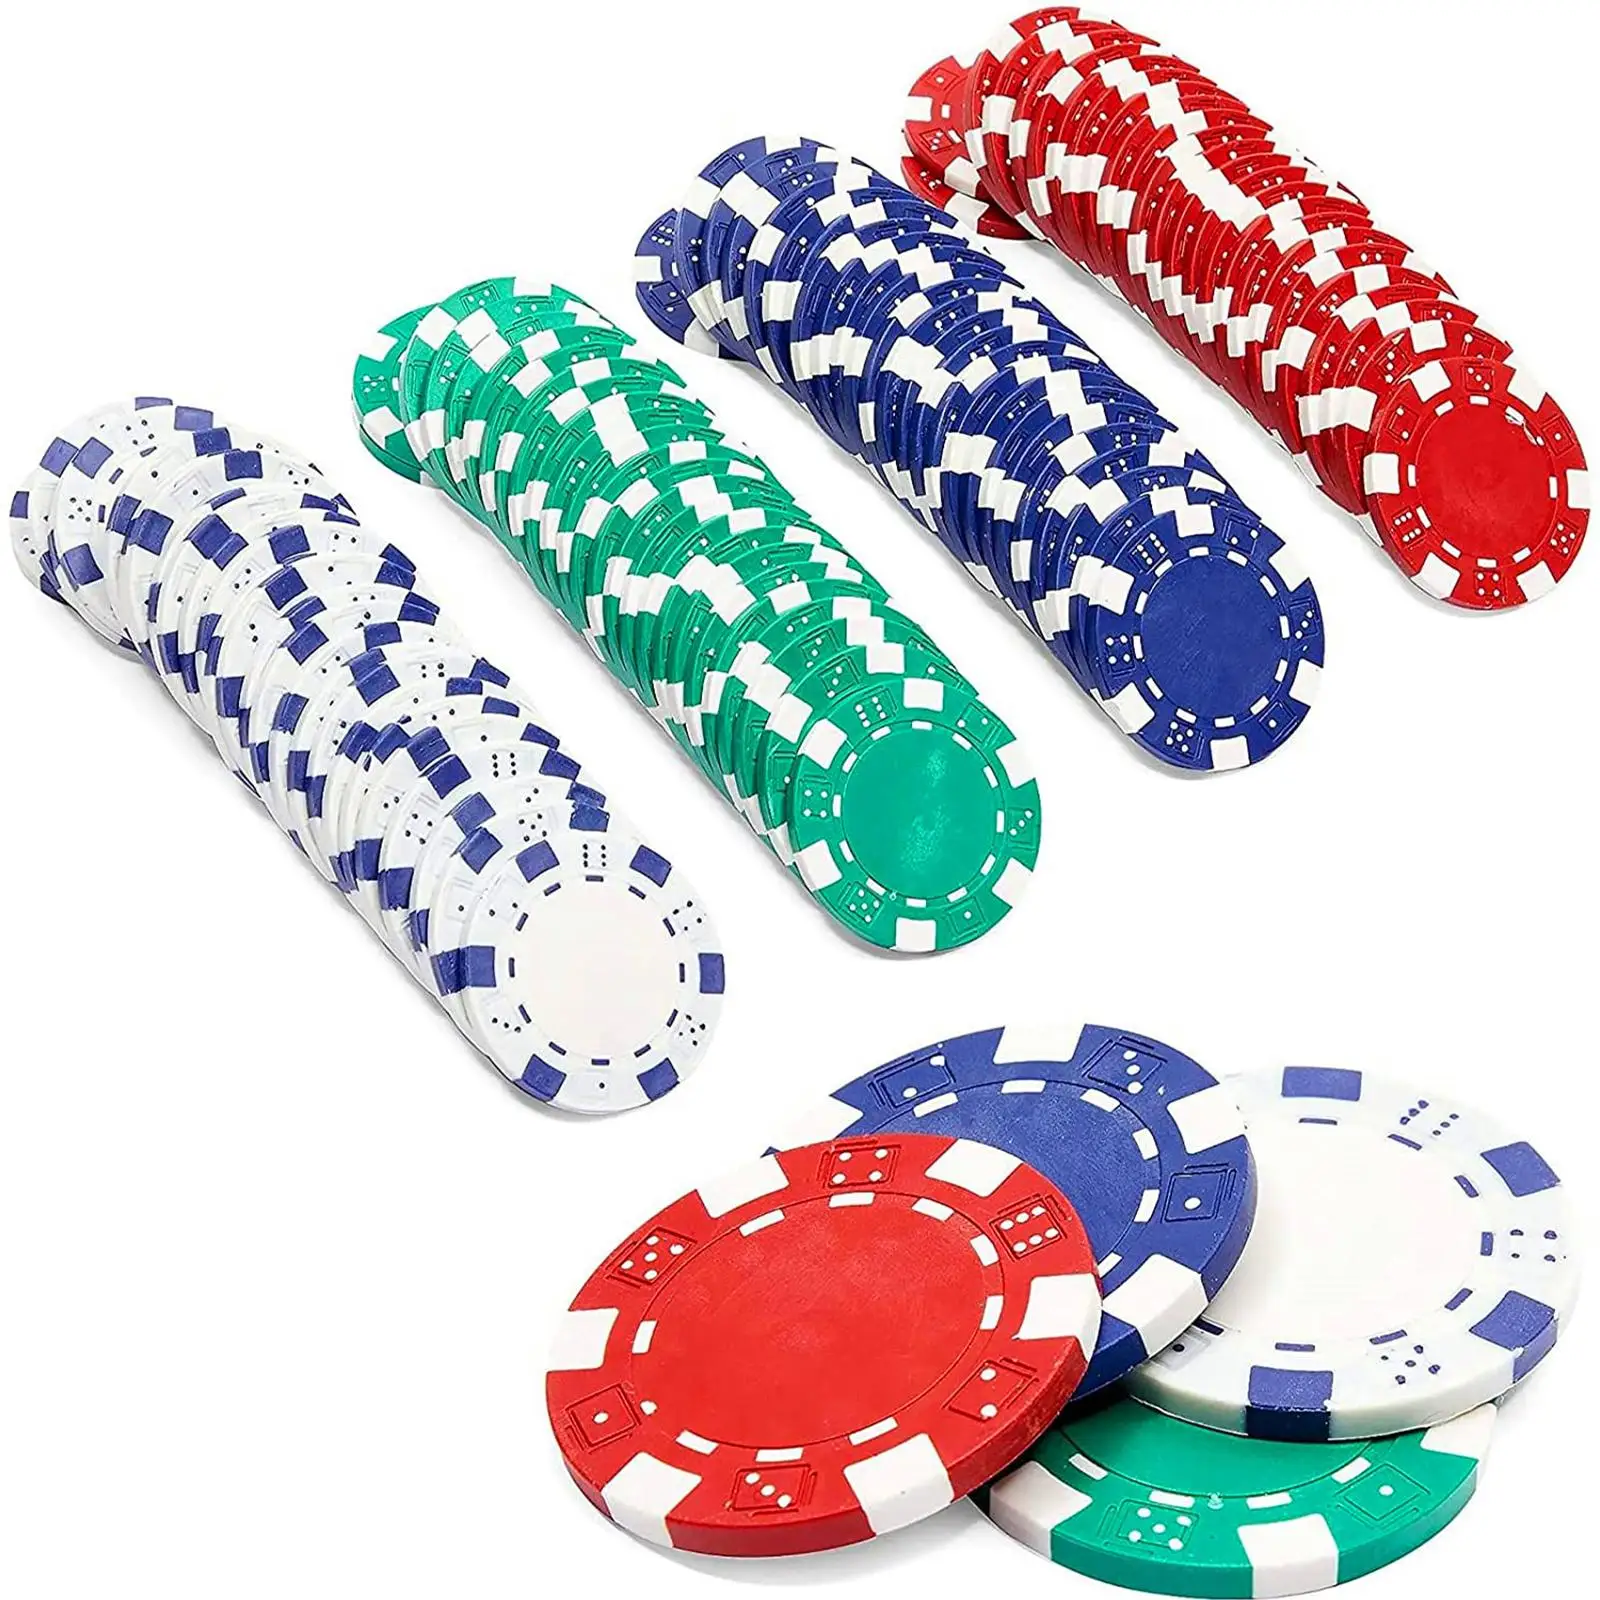 100x ABS Poker Chips Colored Game Tokens Durable Premium Bingo Chips Markers for Carnival Board Games Counting Supplies Accs